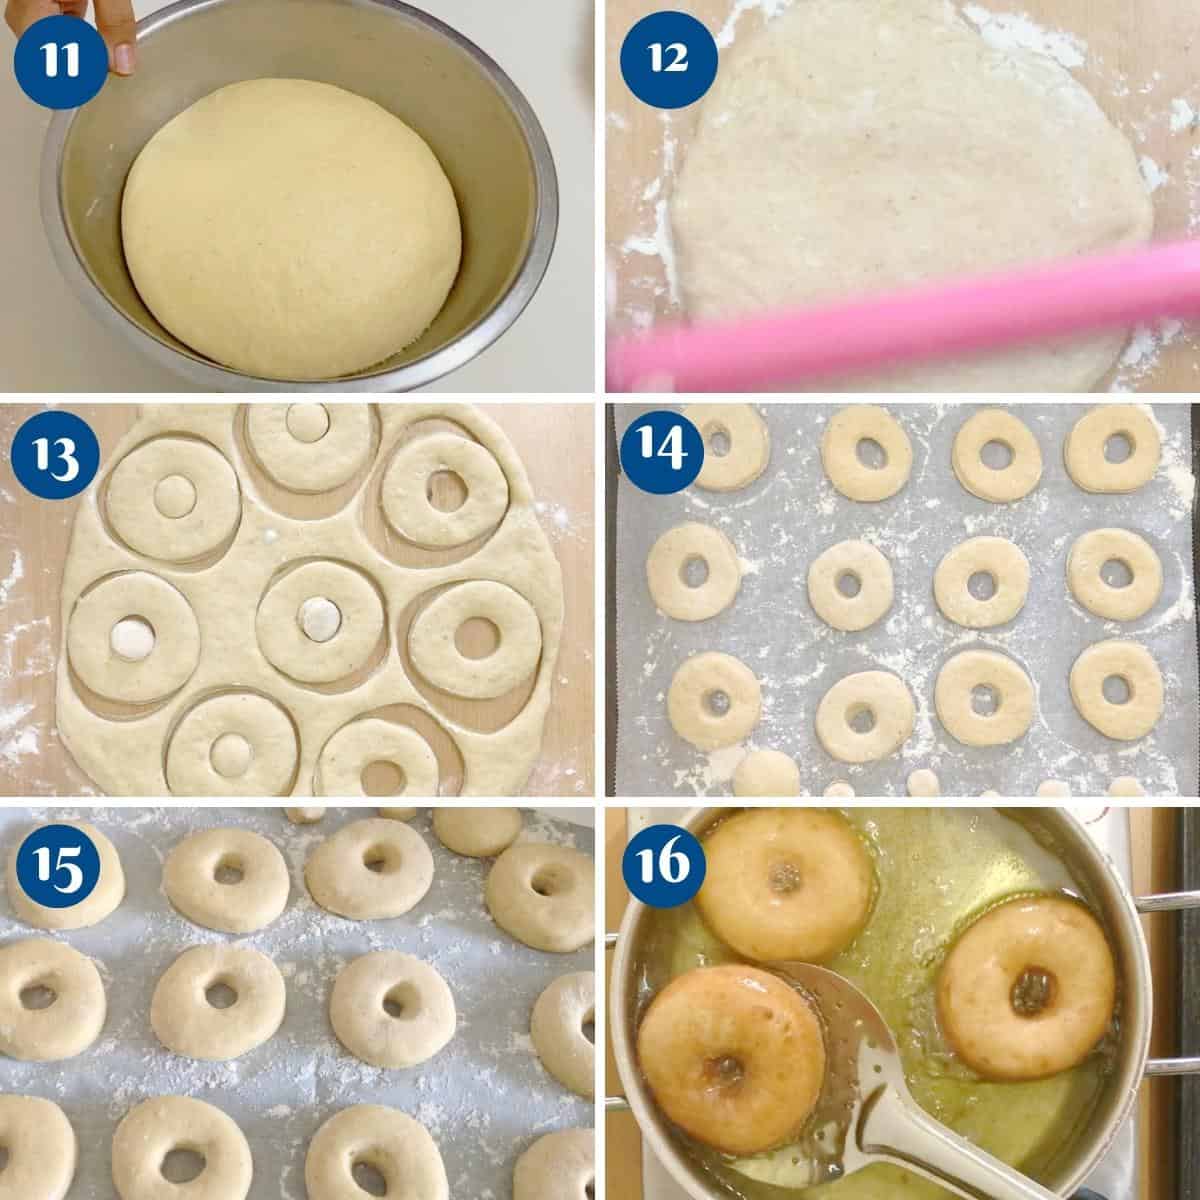 Progress pictures deep frying the donuts.